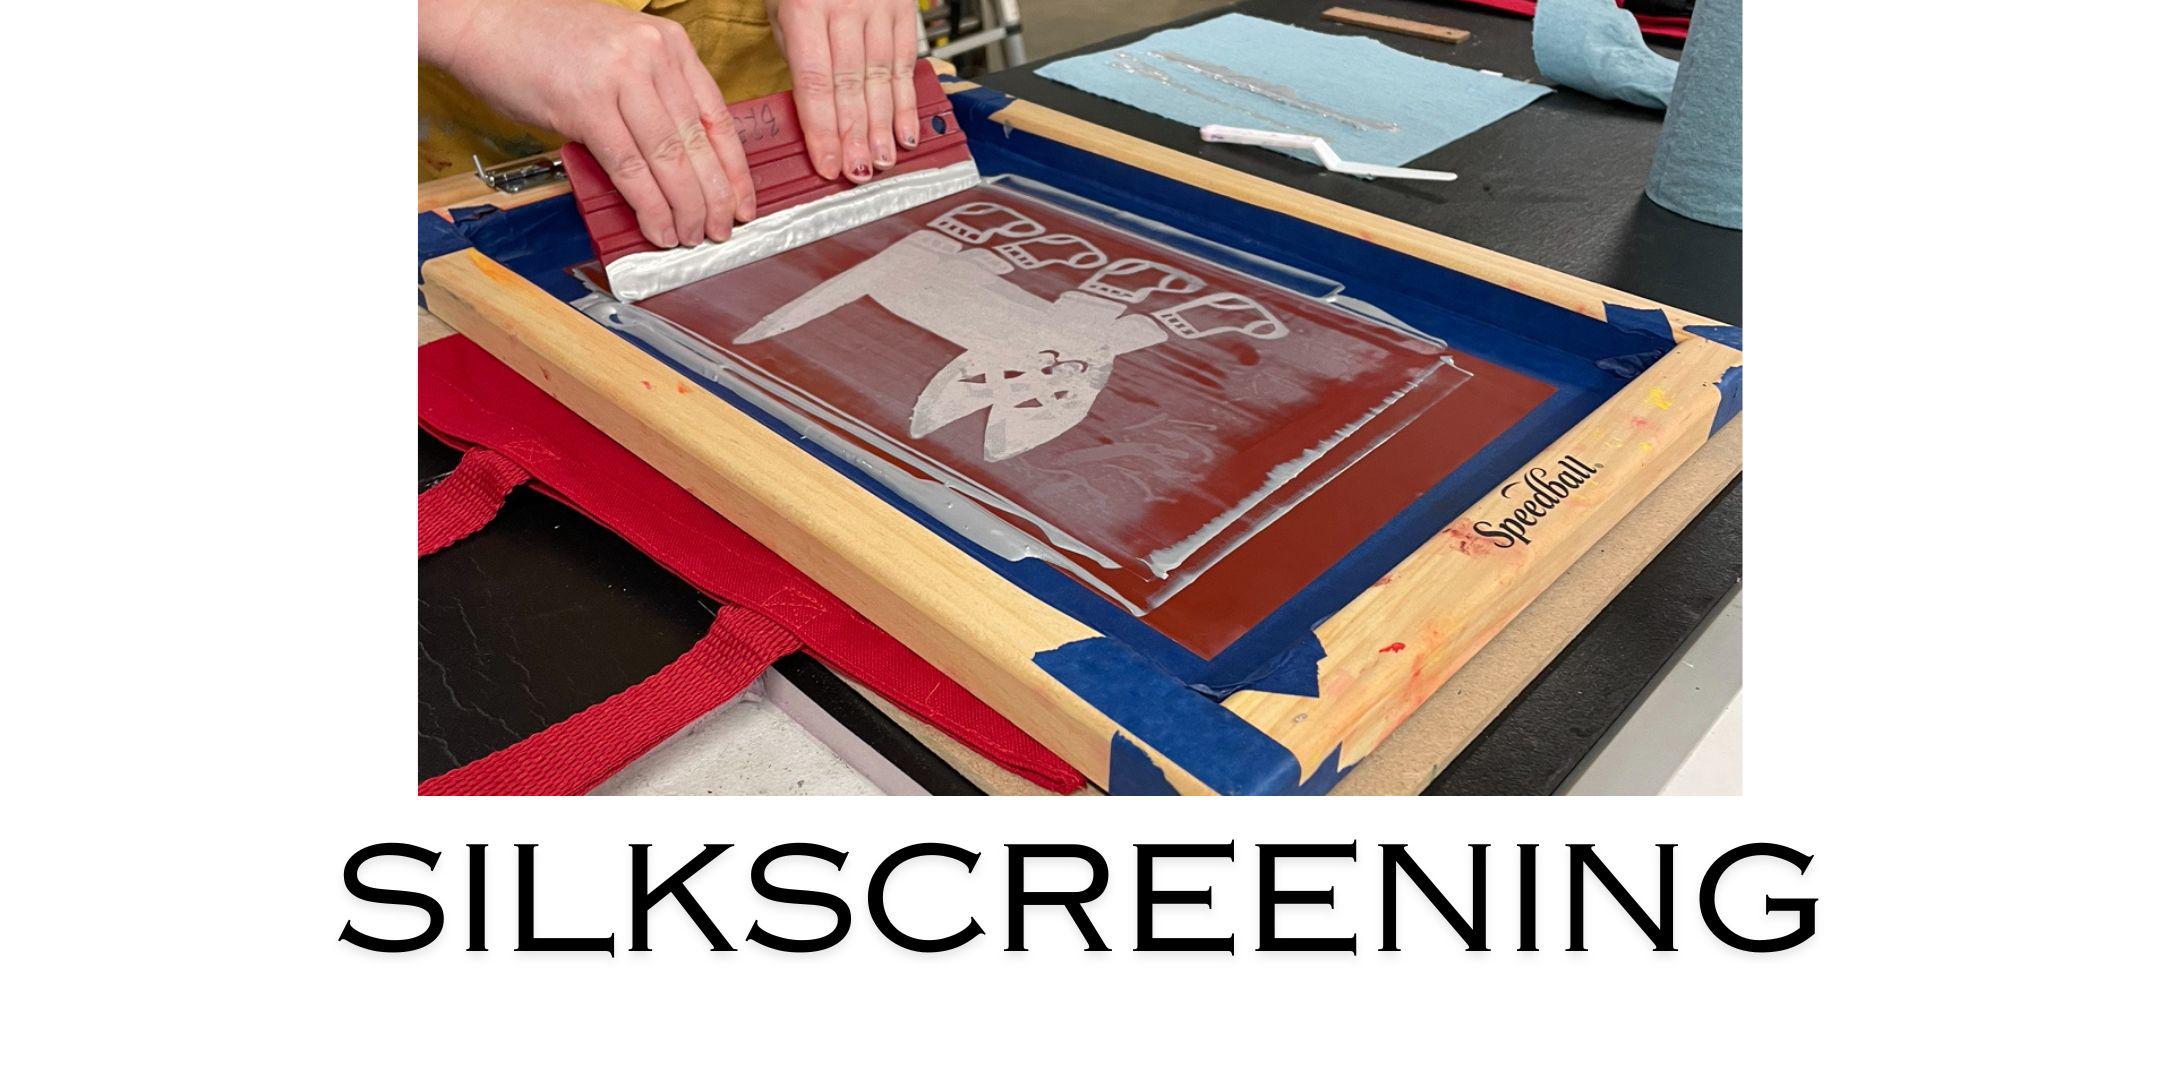 A beginner's guide to screen printing, by a complete beginner., by James  Barnard